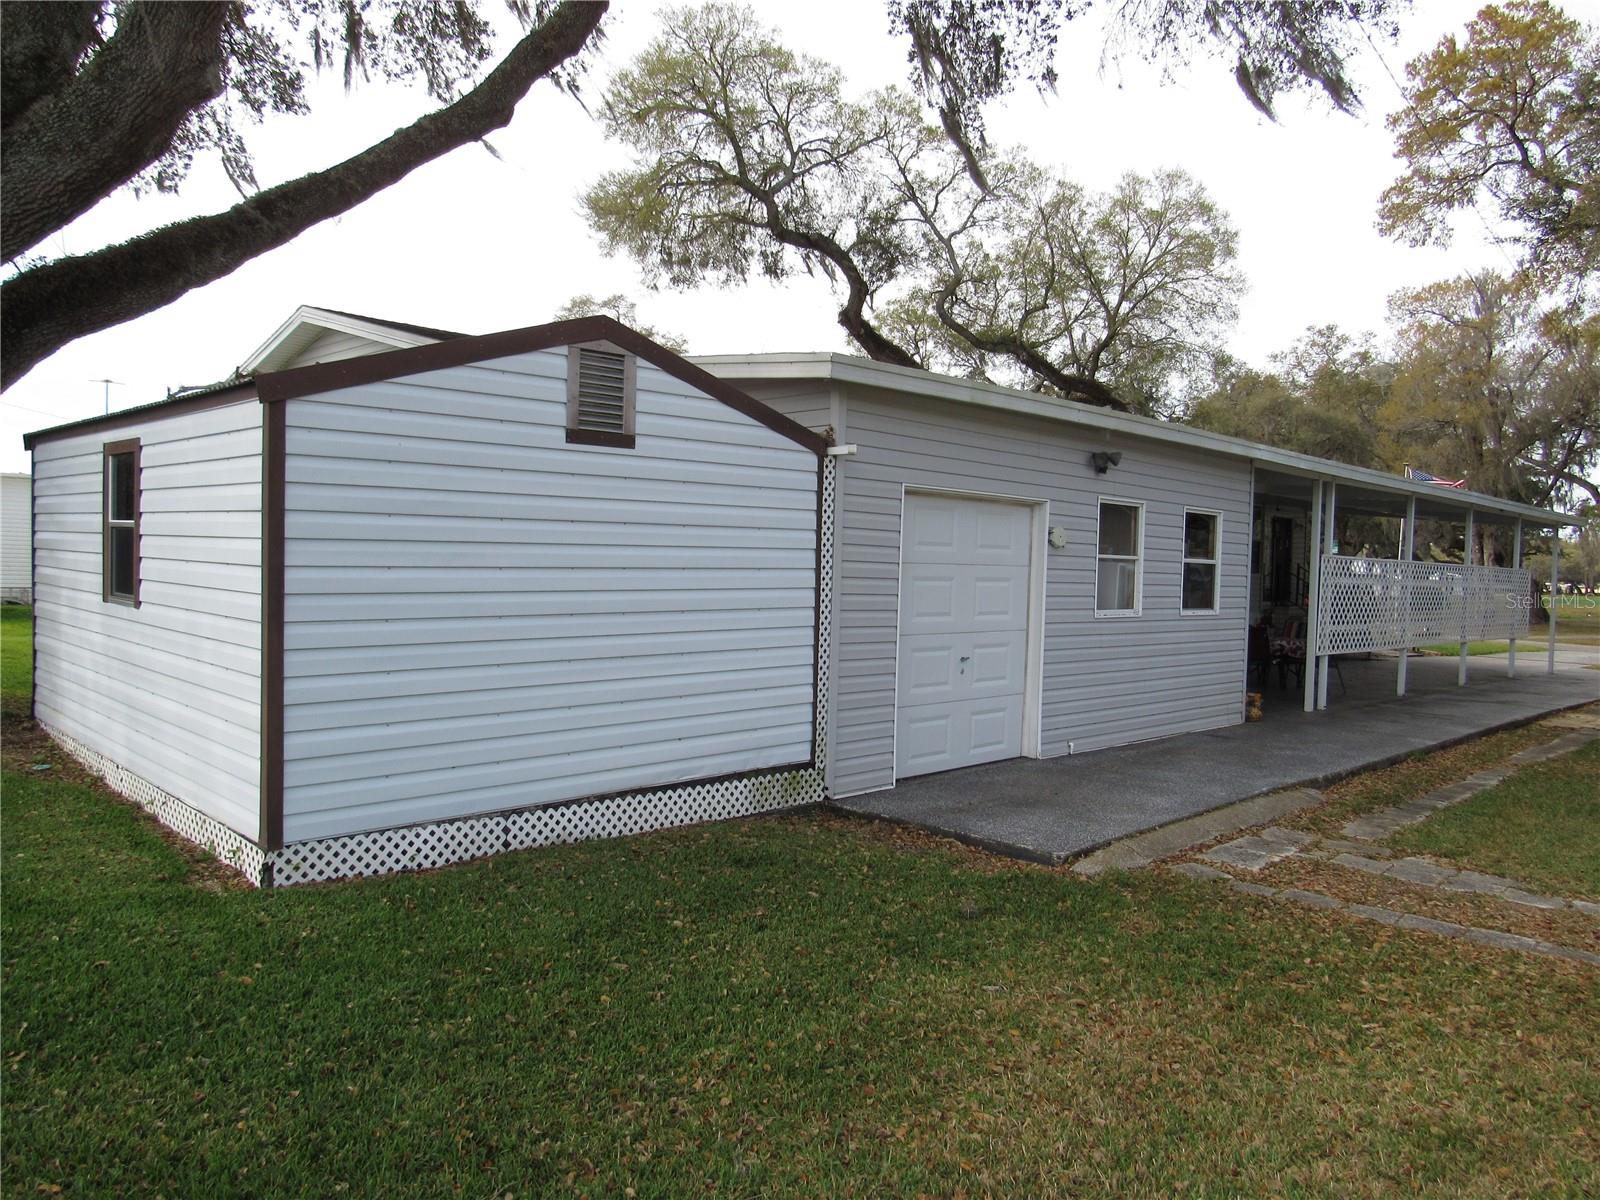 Attached freestanding shed with additional golf cart parking & ramp.